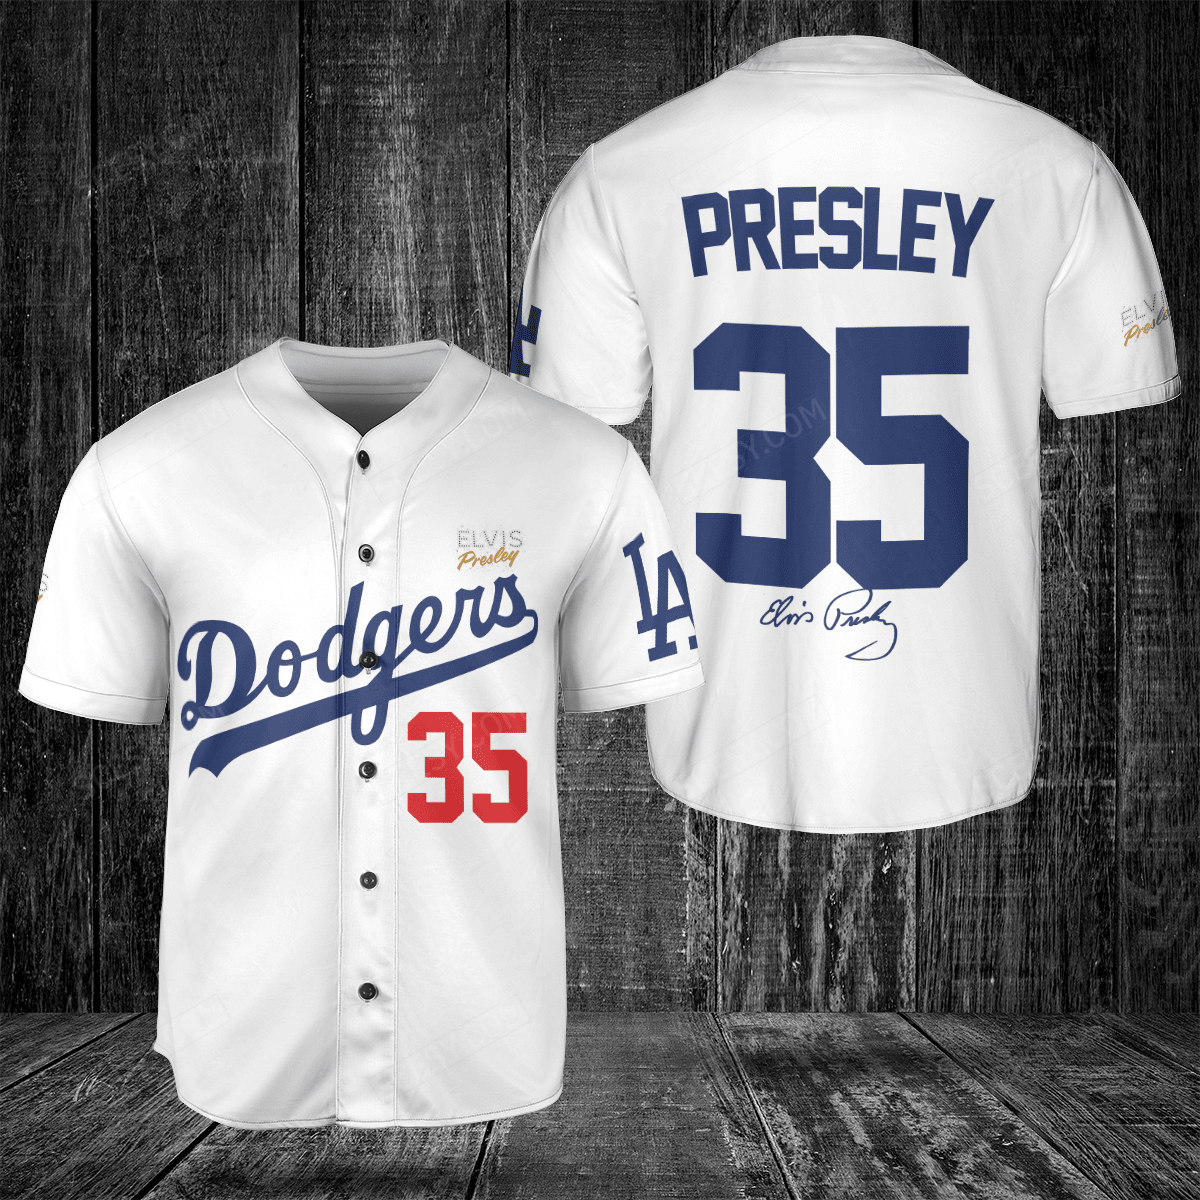 Elvis Presley Dodgers Jersey - Limited Edition - Scesy